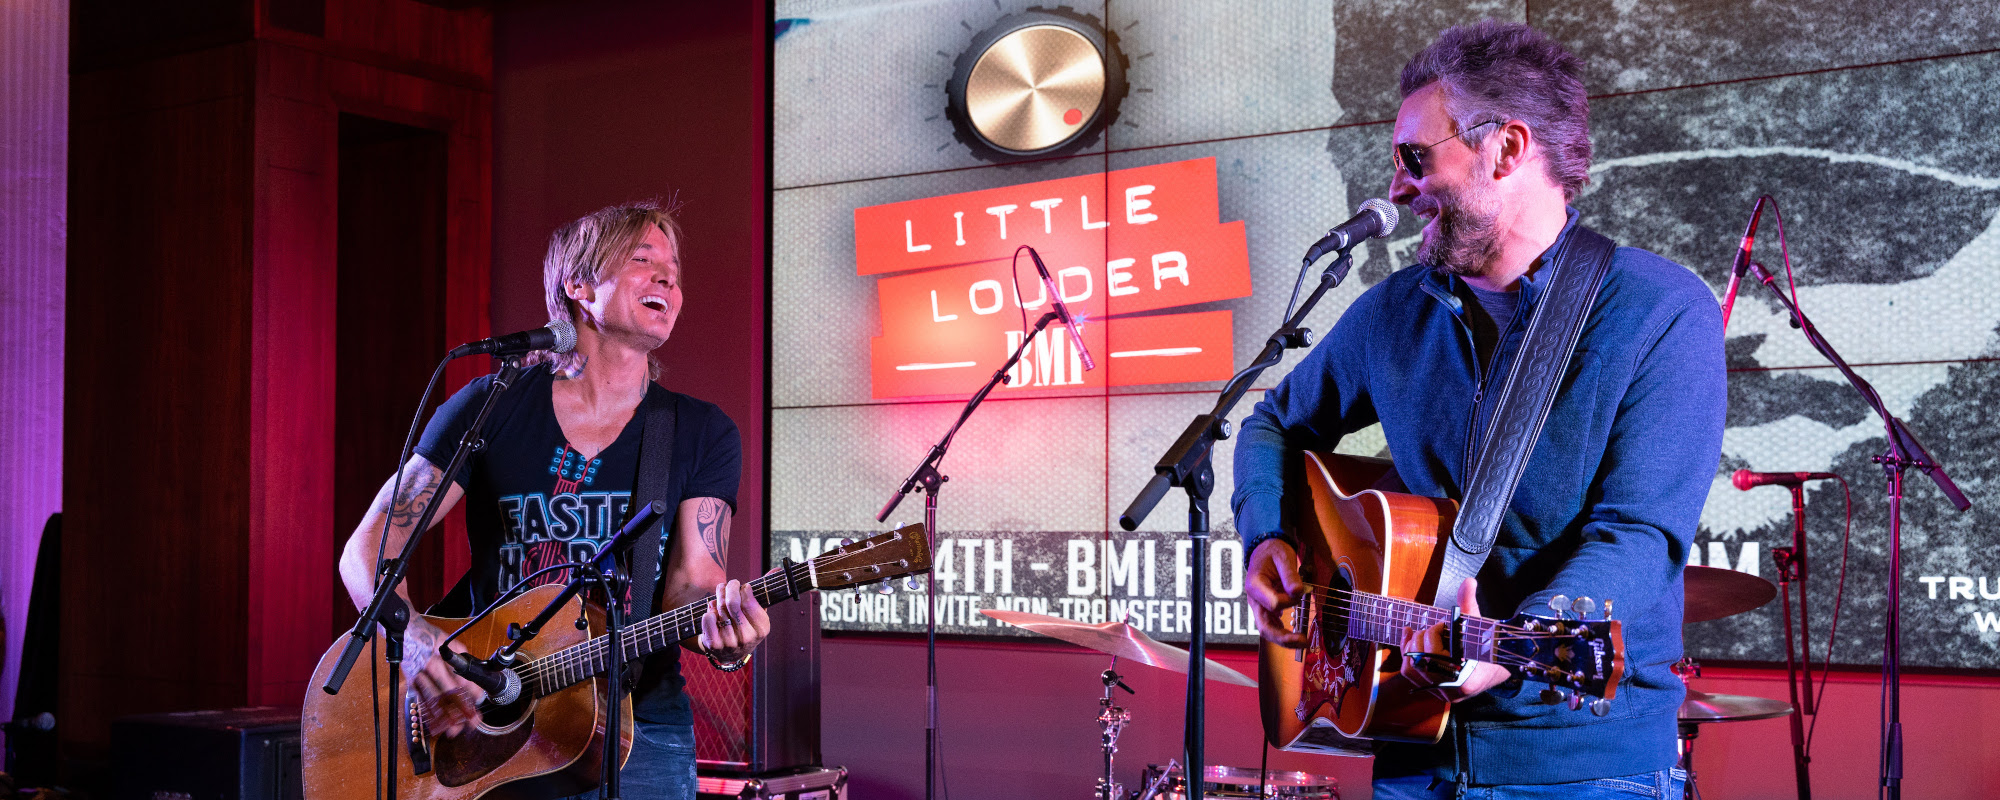 Eric Church-Founded Publishing Label, Little Louder, Celebrates 9 Successful Years